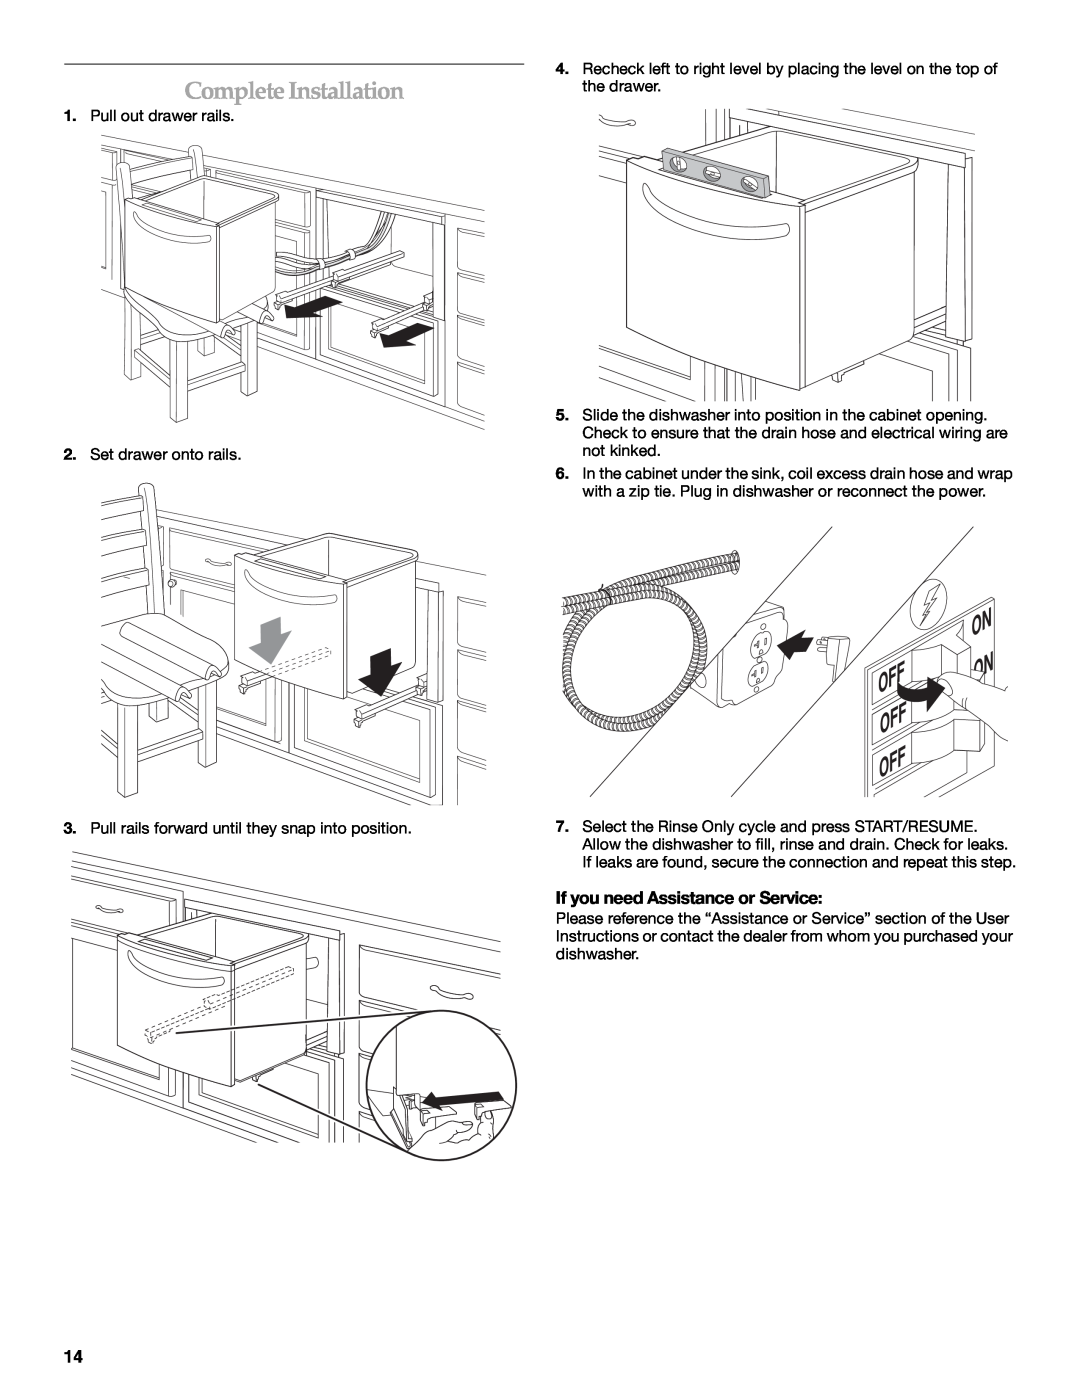 KitchenAid KUDD03STBL installation instructions Complete Installation, If you need Assistance or Service 